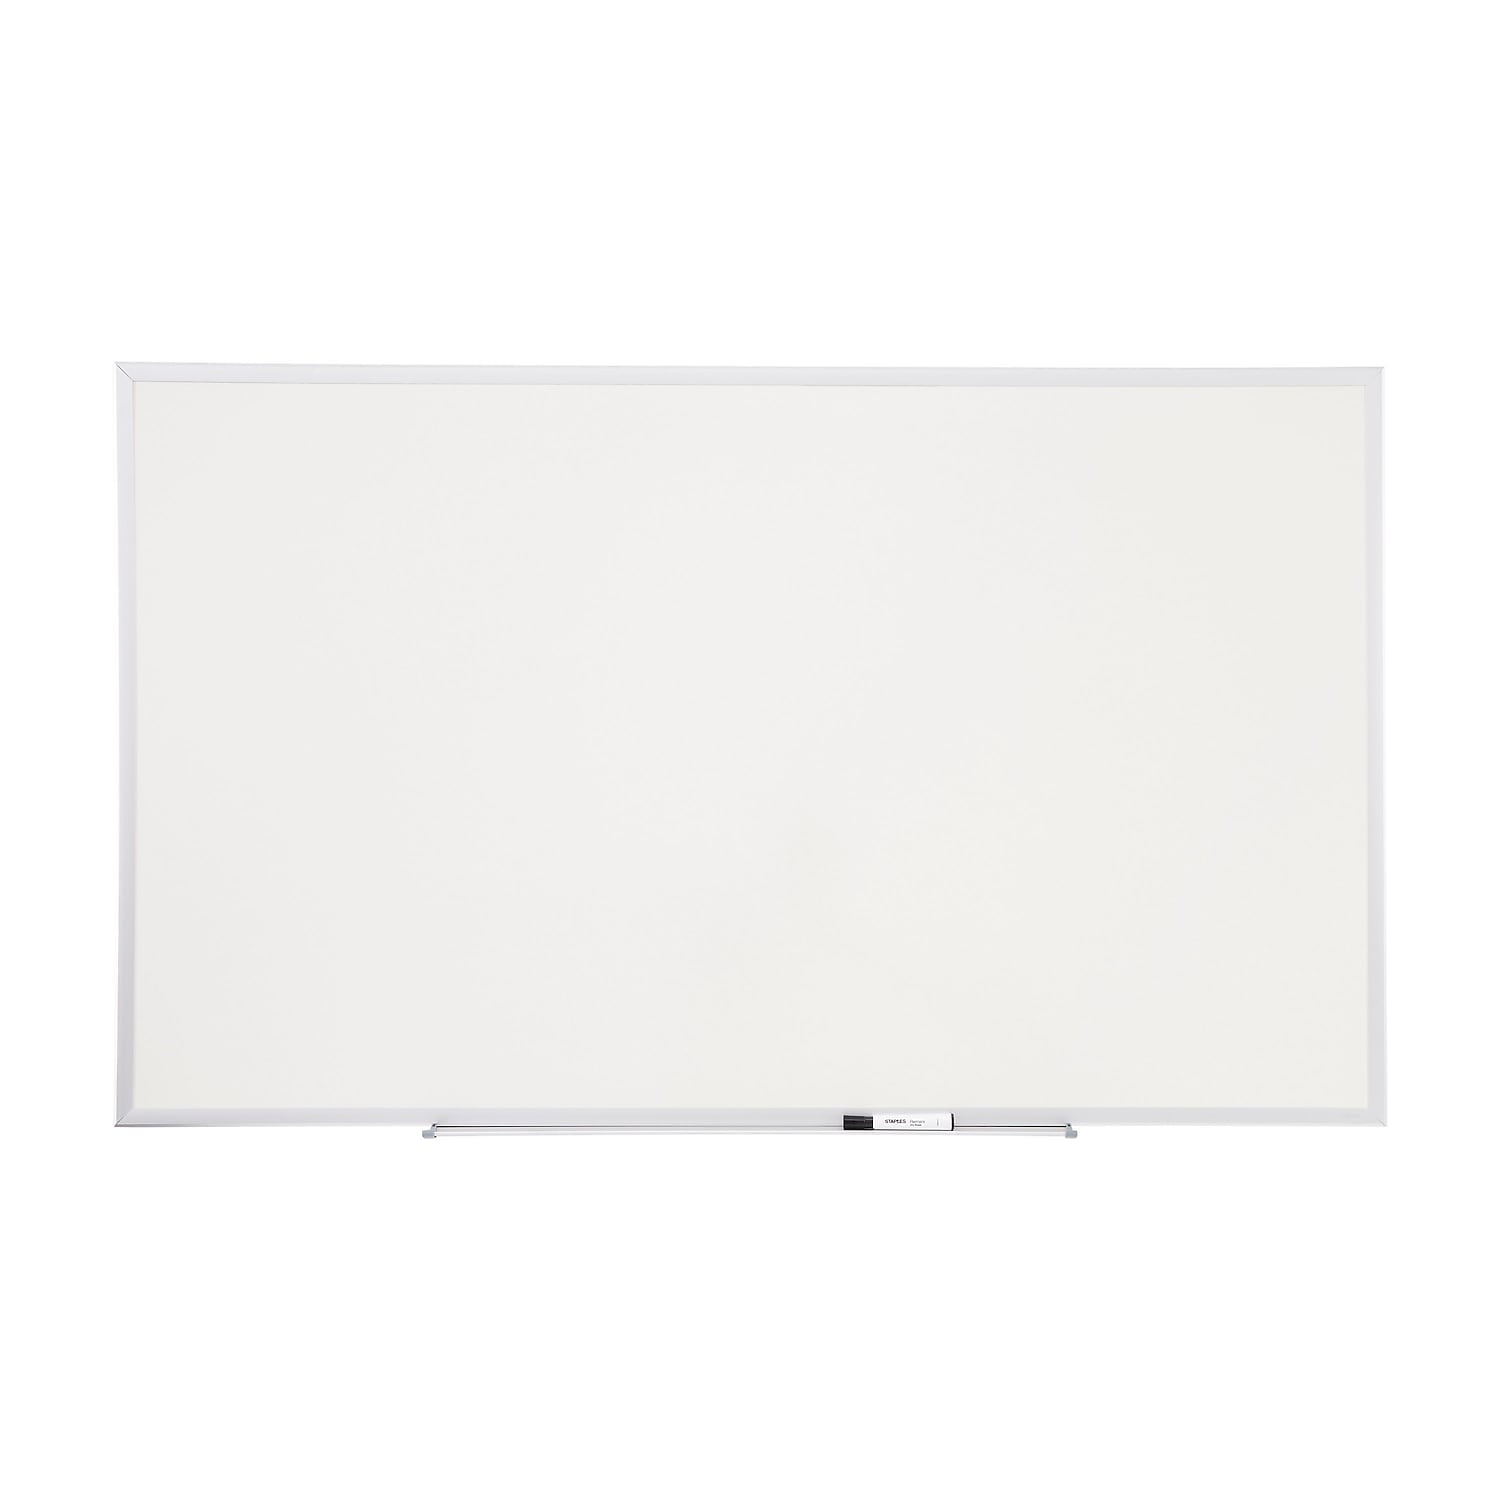 Kassa Large Whiteboard Wall Sticker Roll - 17.3 x 96? (8 Feet) - 3 Dry  Erase Board Markers Included - Adhesive White Board Wallpaper for Fridge,  Office & Kids Room - Peel and Stick Paper De 